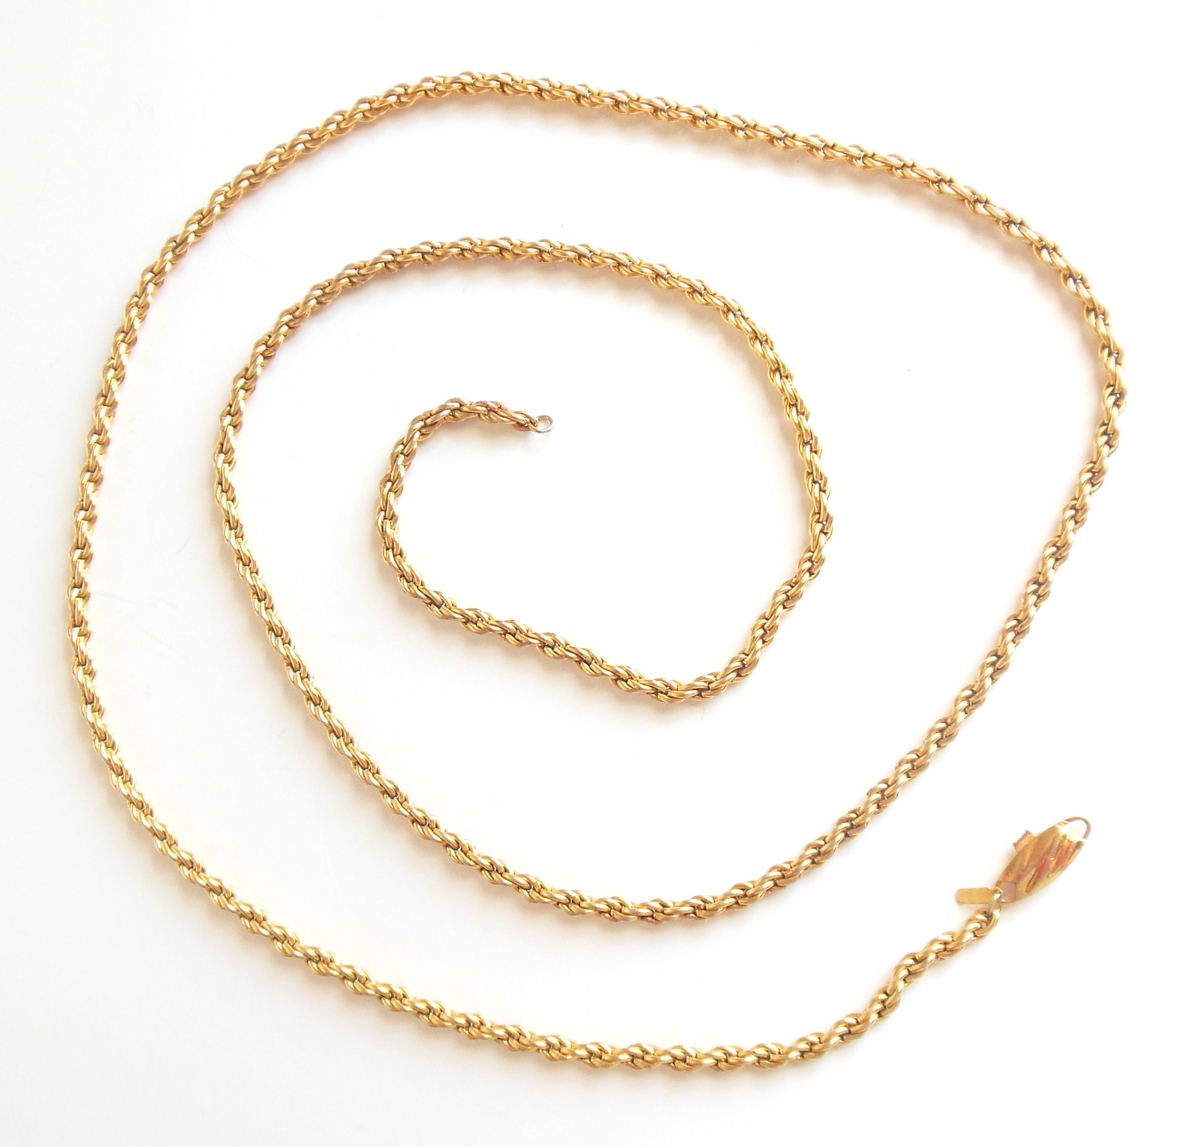 Ladies Vintage Monet 37 Inch Long Gold Rope Necklace Can Be Pulled Over The Head - $17.50